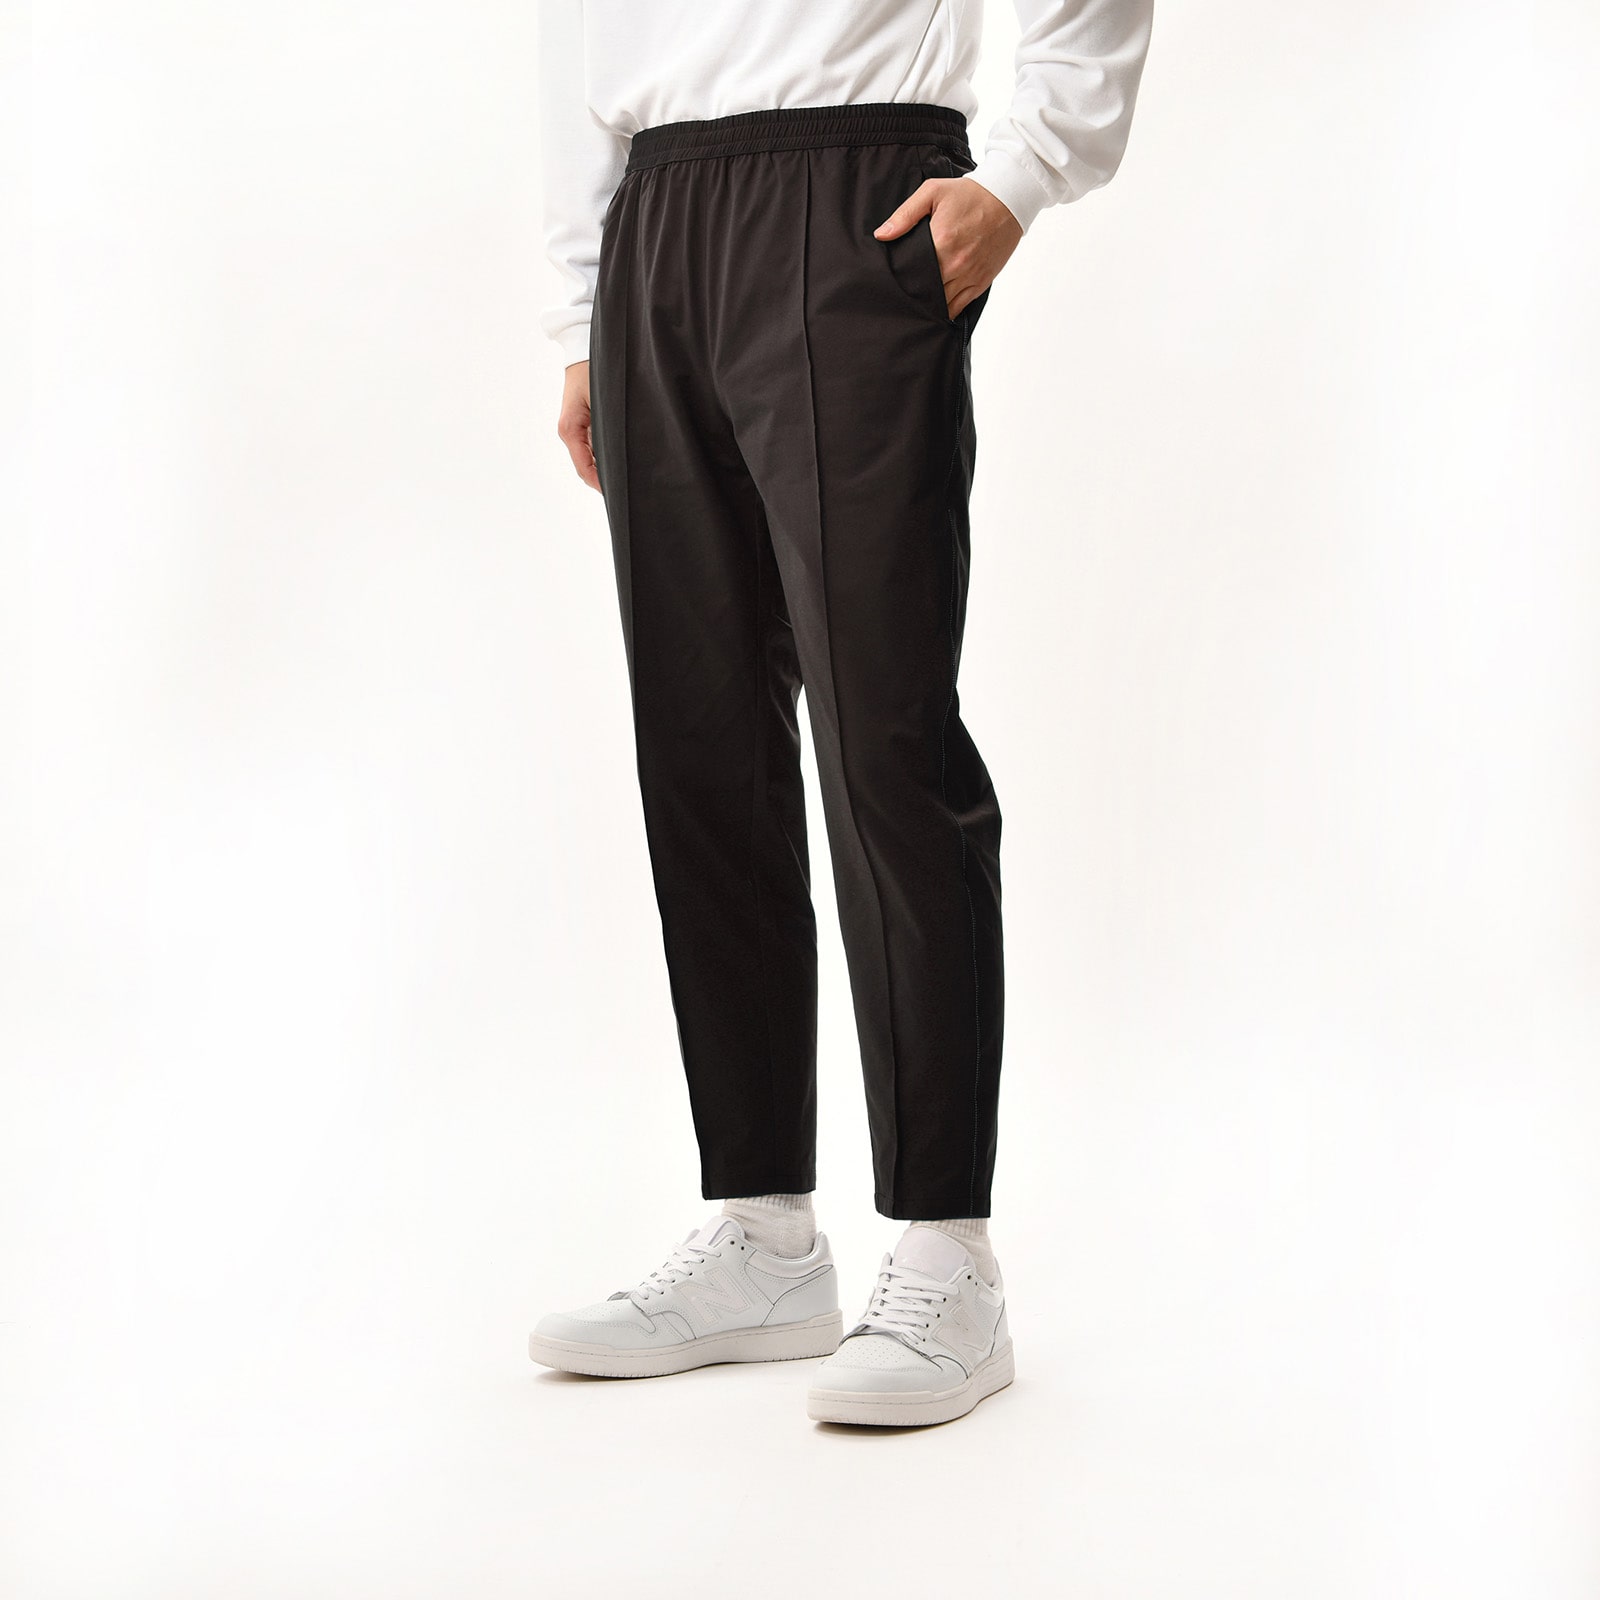 NB公式アウトレット】ニューバランス | Met24 ACTIVE Track Pants|New 